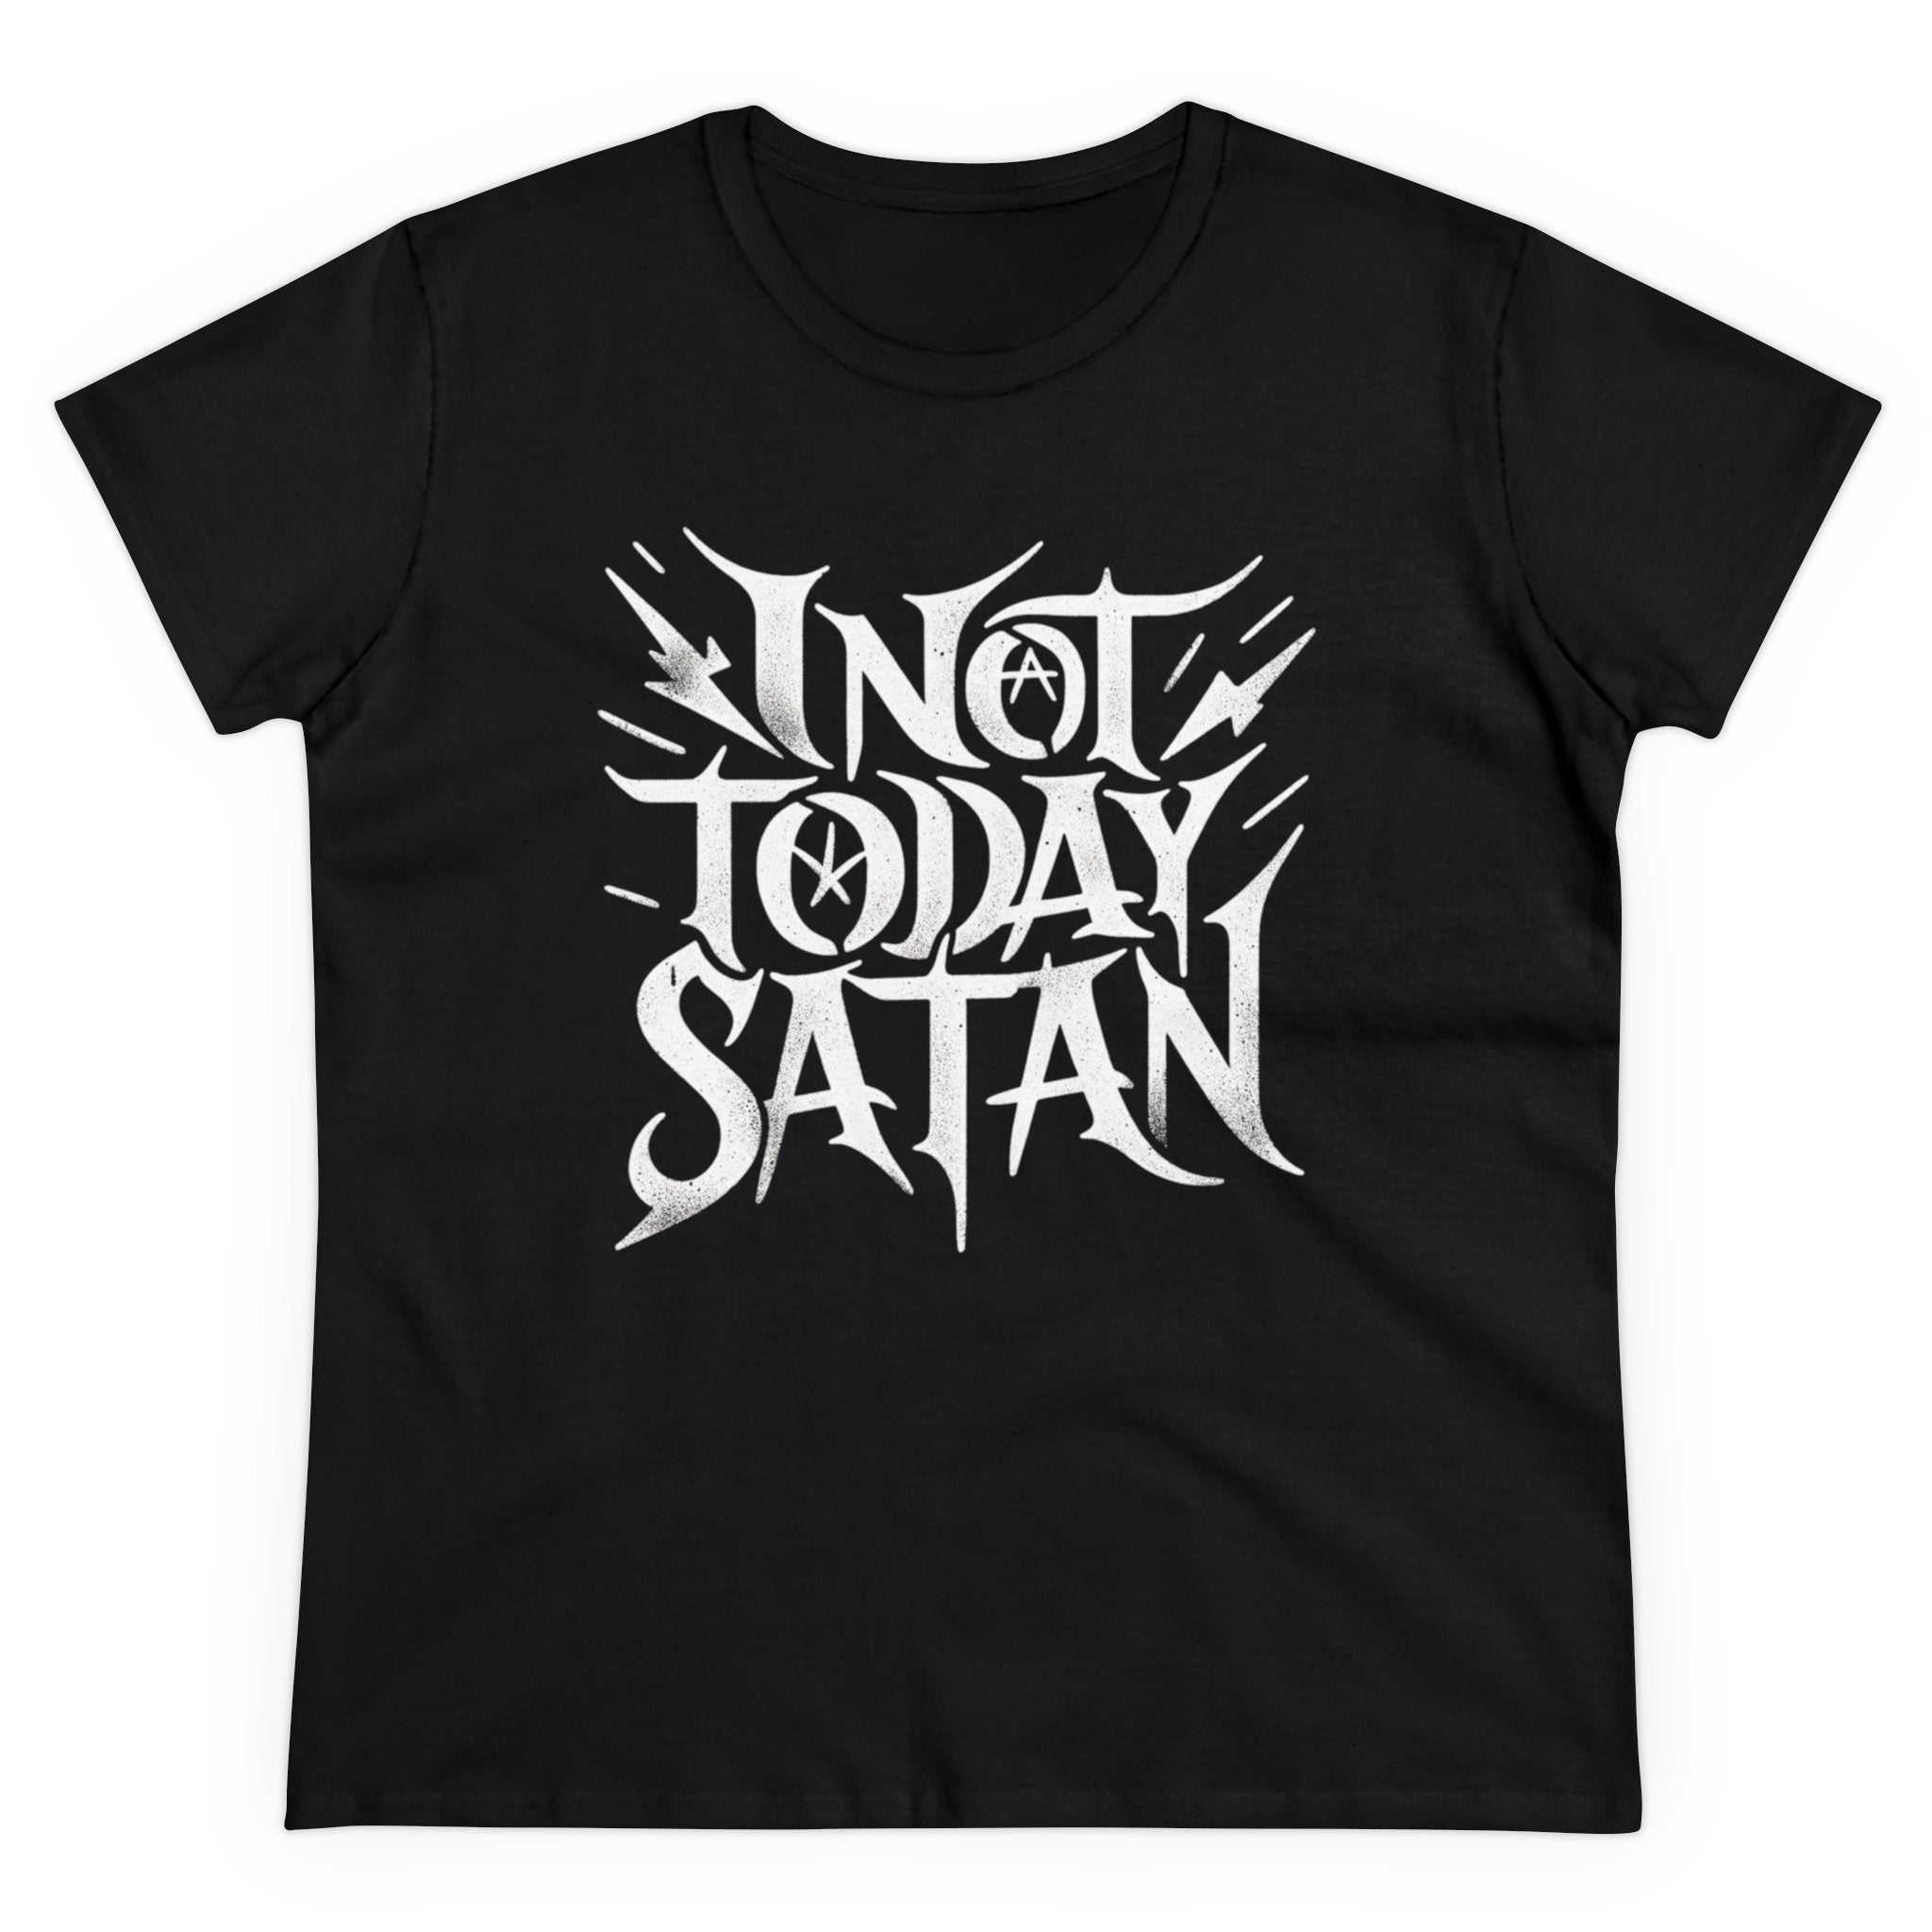 Not Today Satan - Women's Tee: Black t-shirt crafted from pre-shrunk cotton, featuring the words "Not Today Satan" printed in stylized white text on the front.